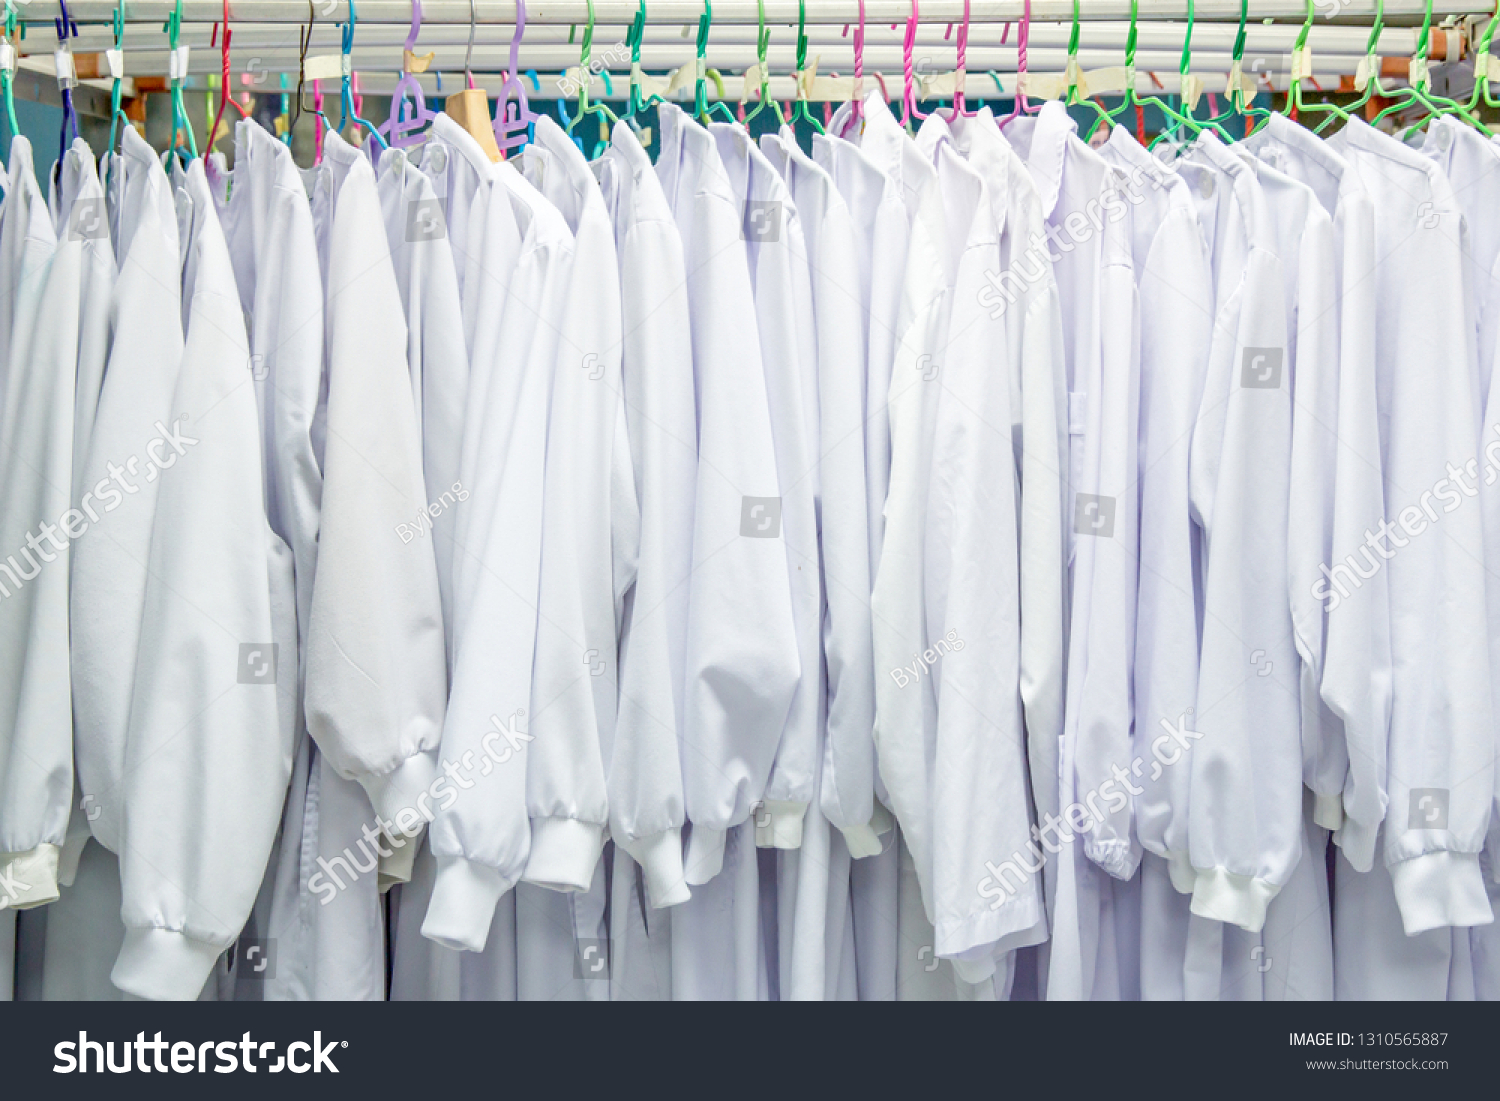 White Medical Uniform Clothes On Hangers Stock Photo 1310565887 ...